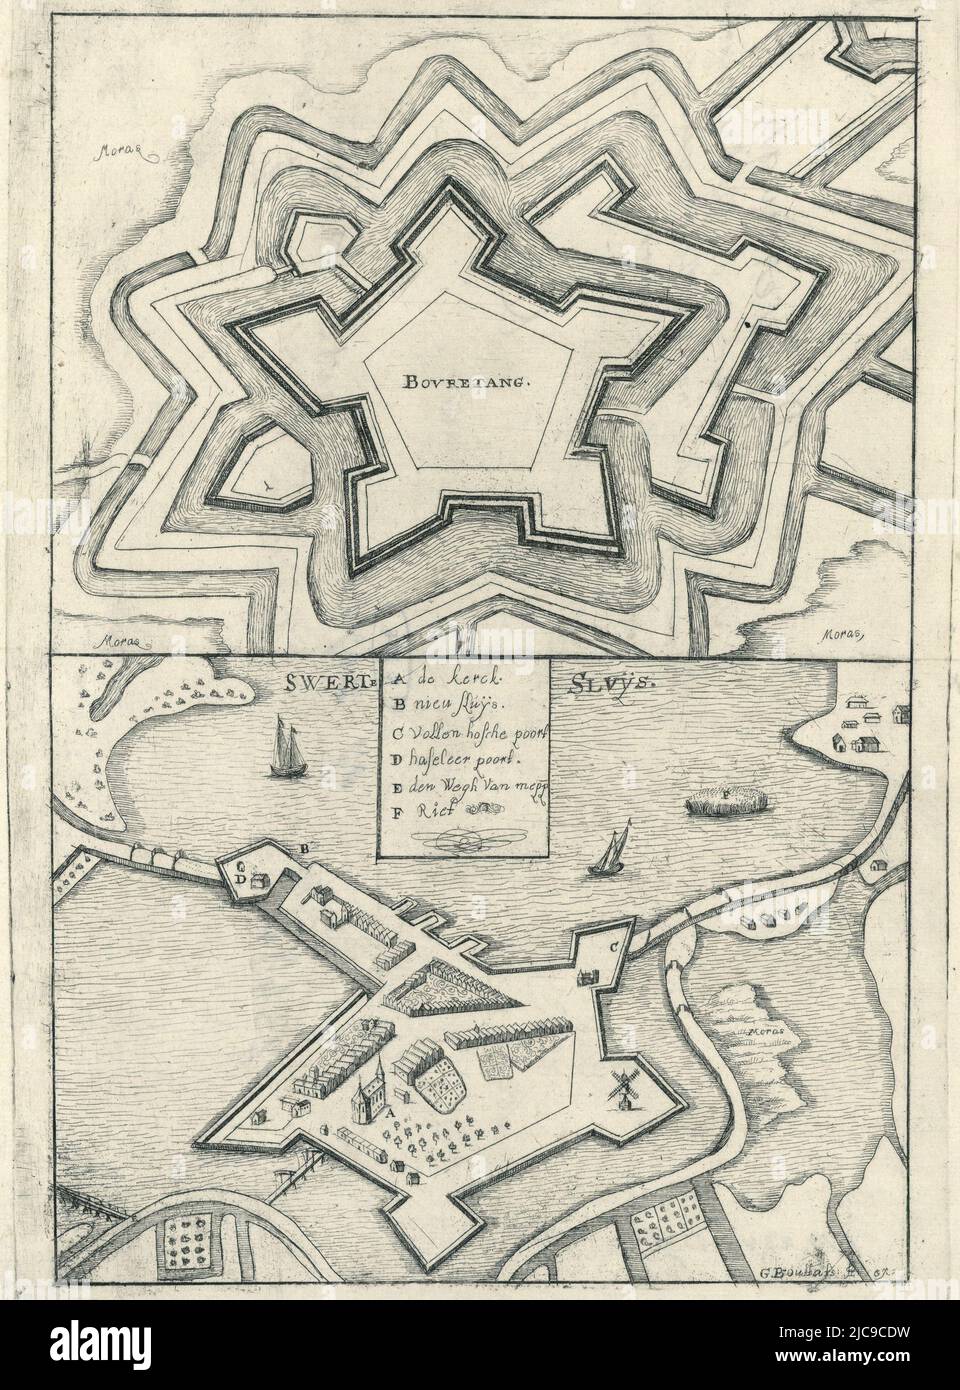 Plans of the fortifications of Boertange and Zwartsluis. This print is one of a group of twelve, mostly etched and published by Gaspar Bouttats, depicting views of fortresses and towns captured by the French and the Bishop of Munster in 1672. Plans of the fortresses at Boertange and Zwartsluis, captured by the French or Munster, 1672 Twelve views of fortresses and cities captured by the French and the Bishop of Munster in 1672 Picture of some cities and fortifications of which differente soo ghe won and surrendered to his Majesty the Prince of France Lodovicus XIV and to his Serene Highness Stock Photo